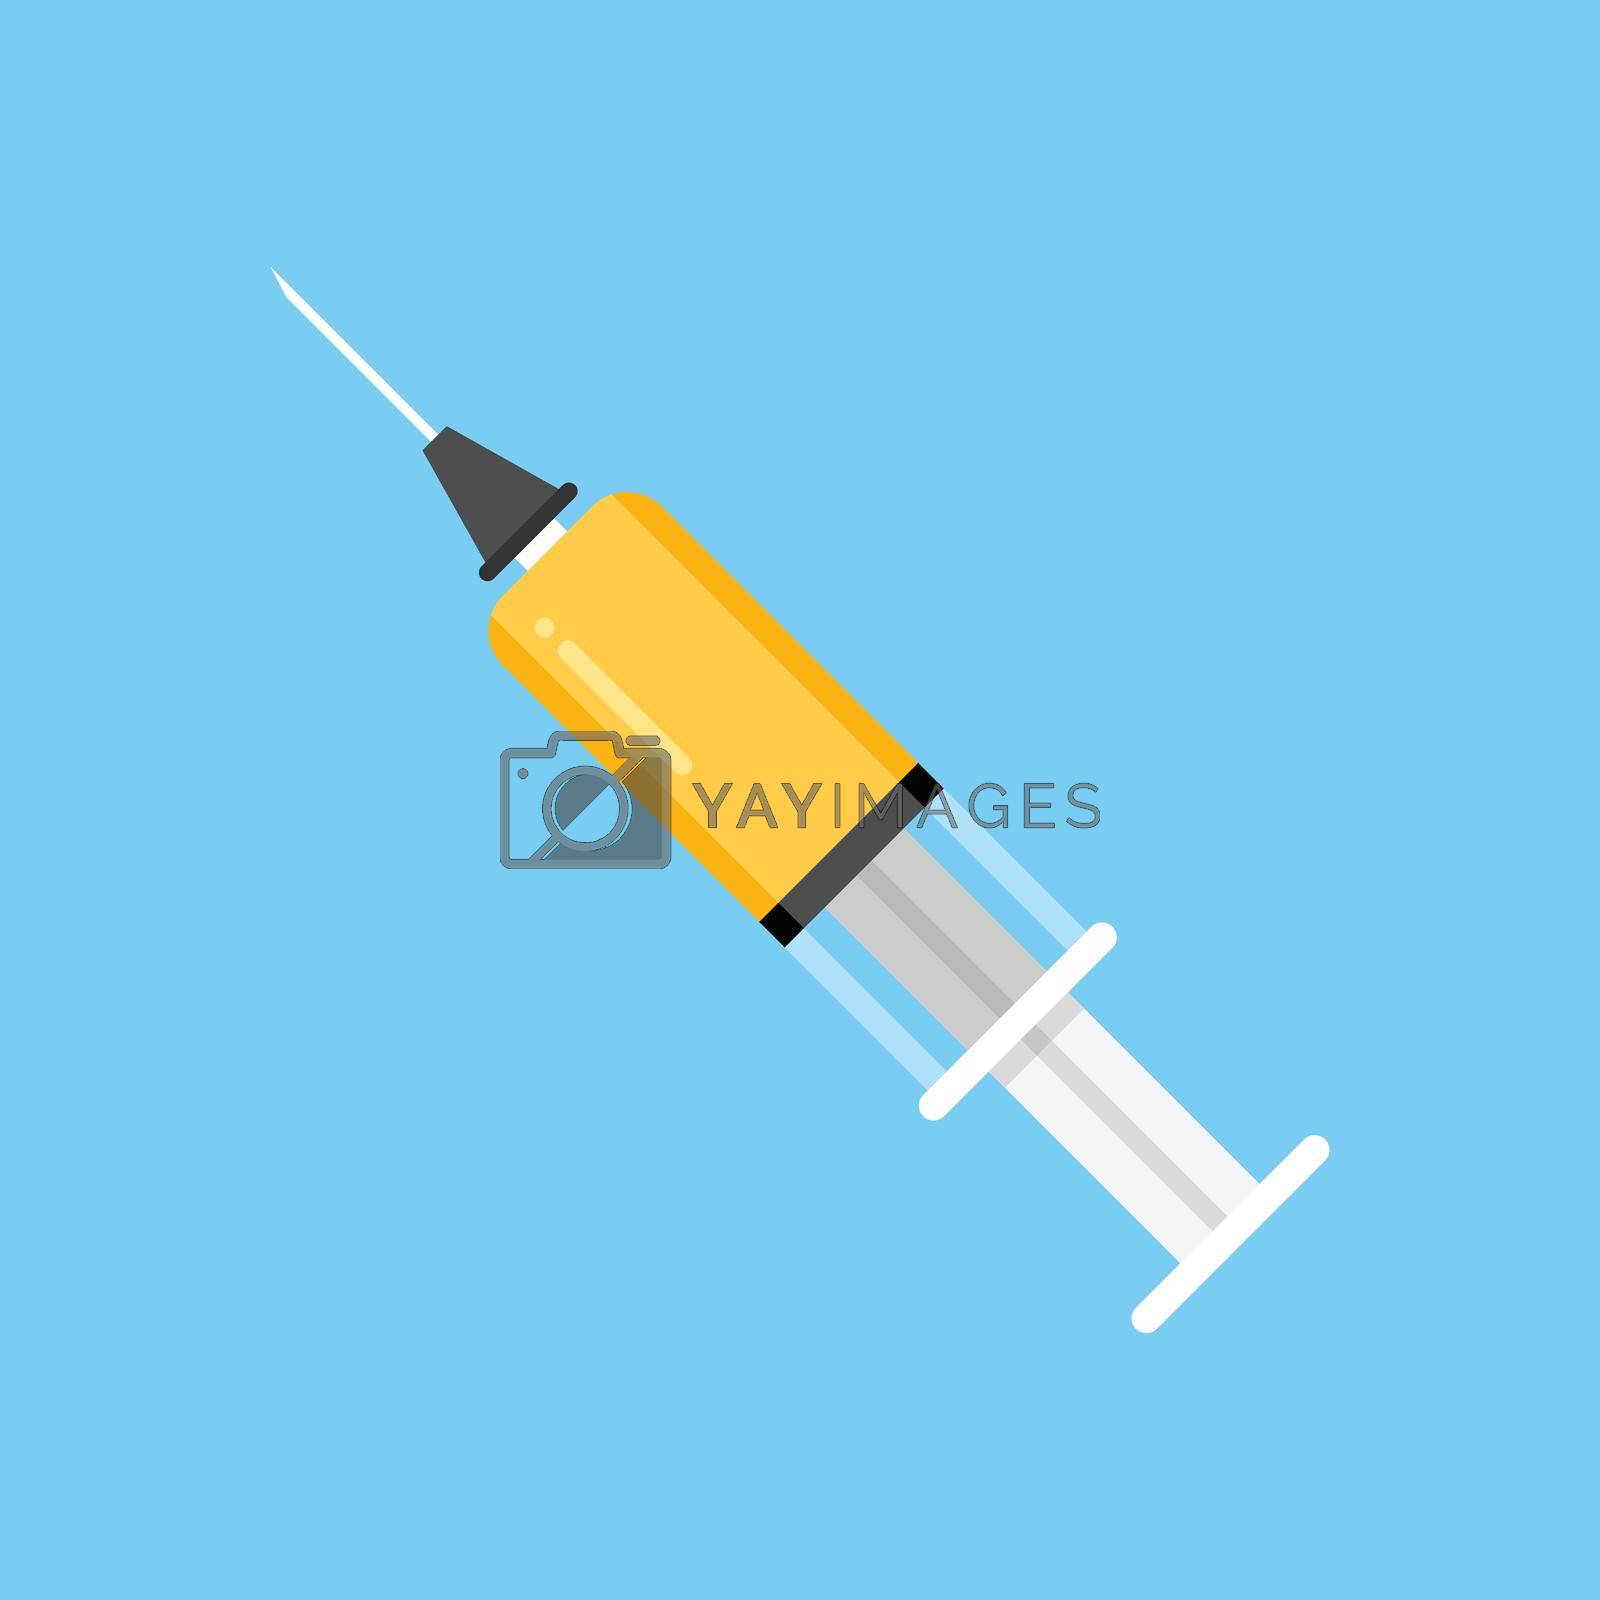 Royalty free image of Syringe icon in flat style. Coronavirus vaccine inject vector illustration on isolated background. Covid-19 vaccination sign business concept. by LysenkoA